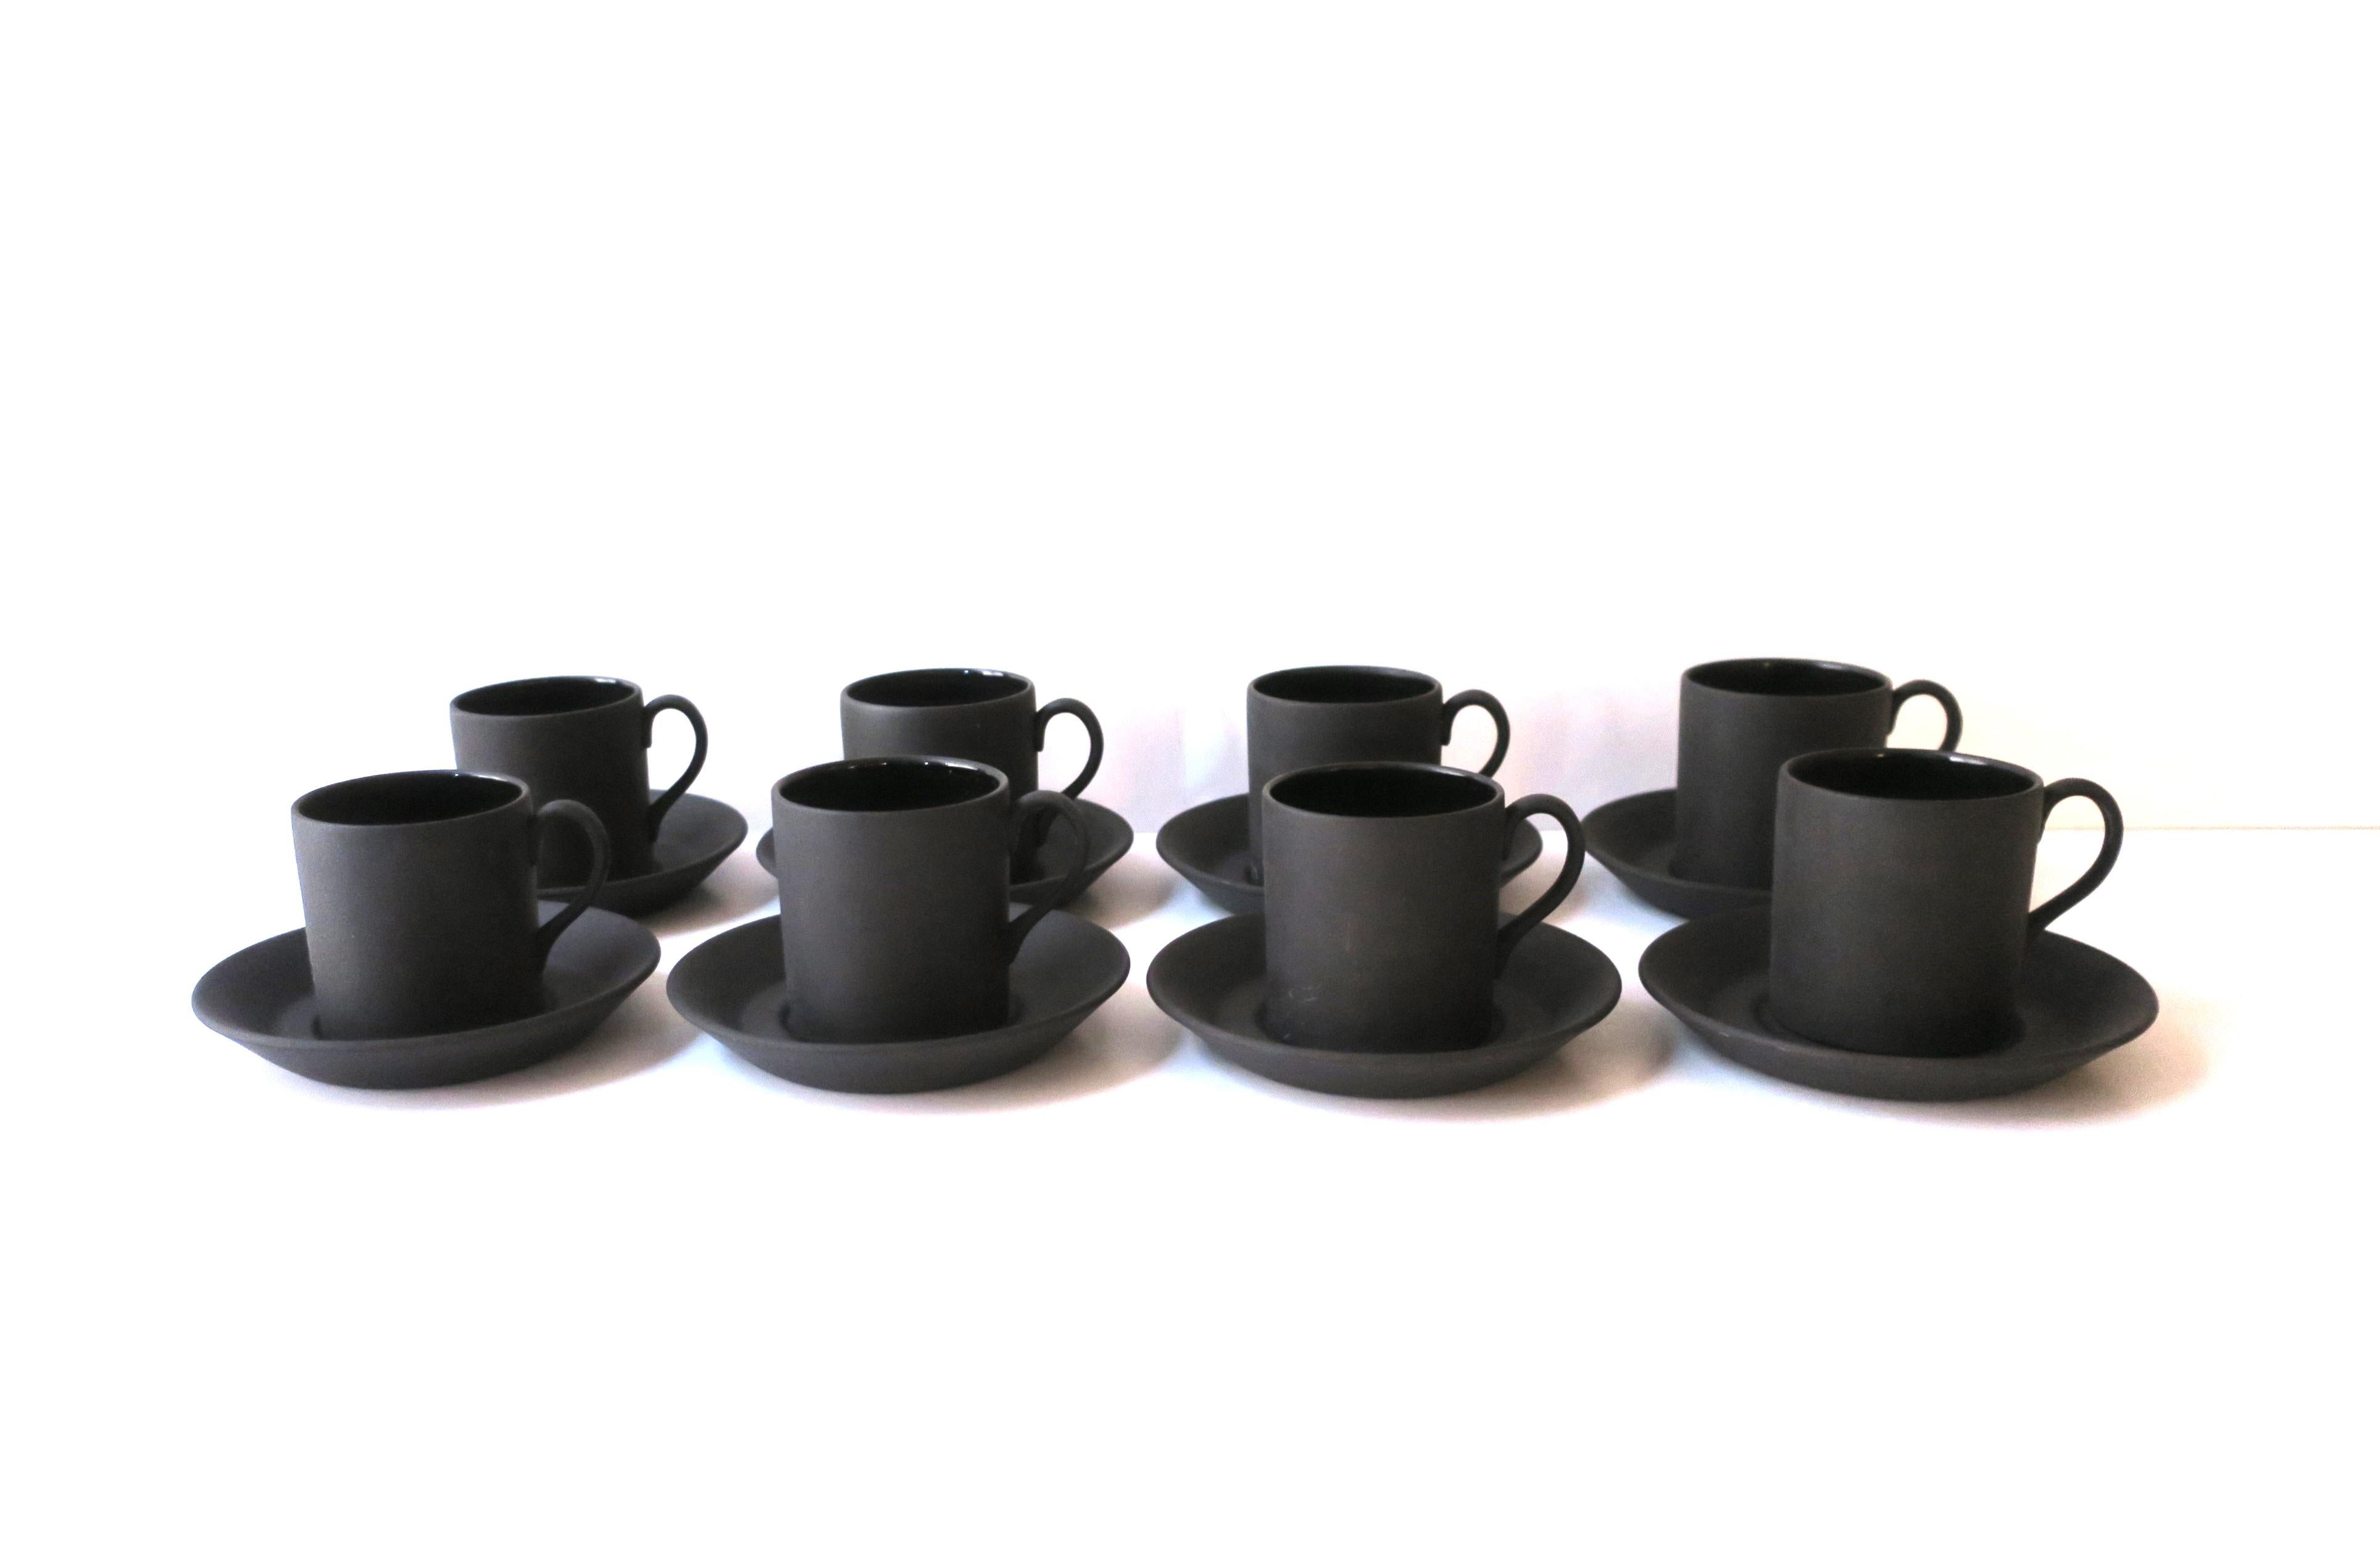 A beautiful and chic set of eight (8) English Wedgwood matte black basalt stoneware espresso coffee or tea demitasse cups and saucers, circa mid to late-20th century, England. Exterior of cup and saucer have a matte surface, interior of cup is